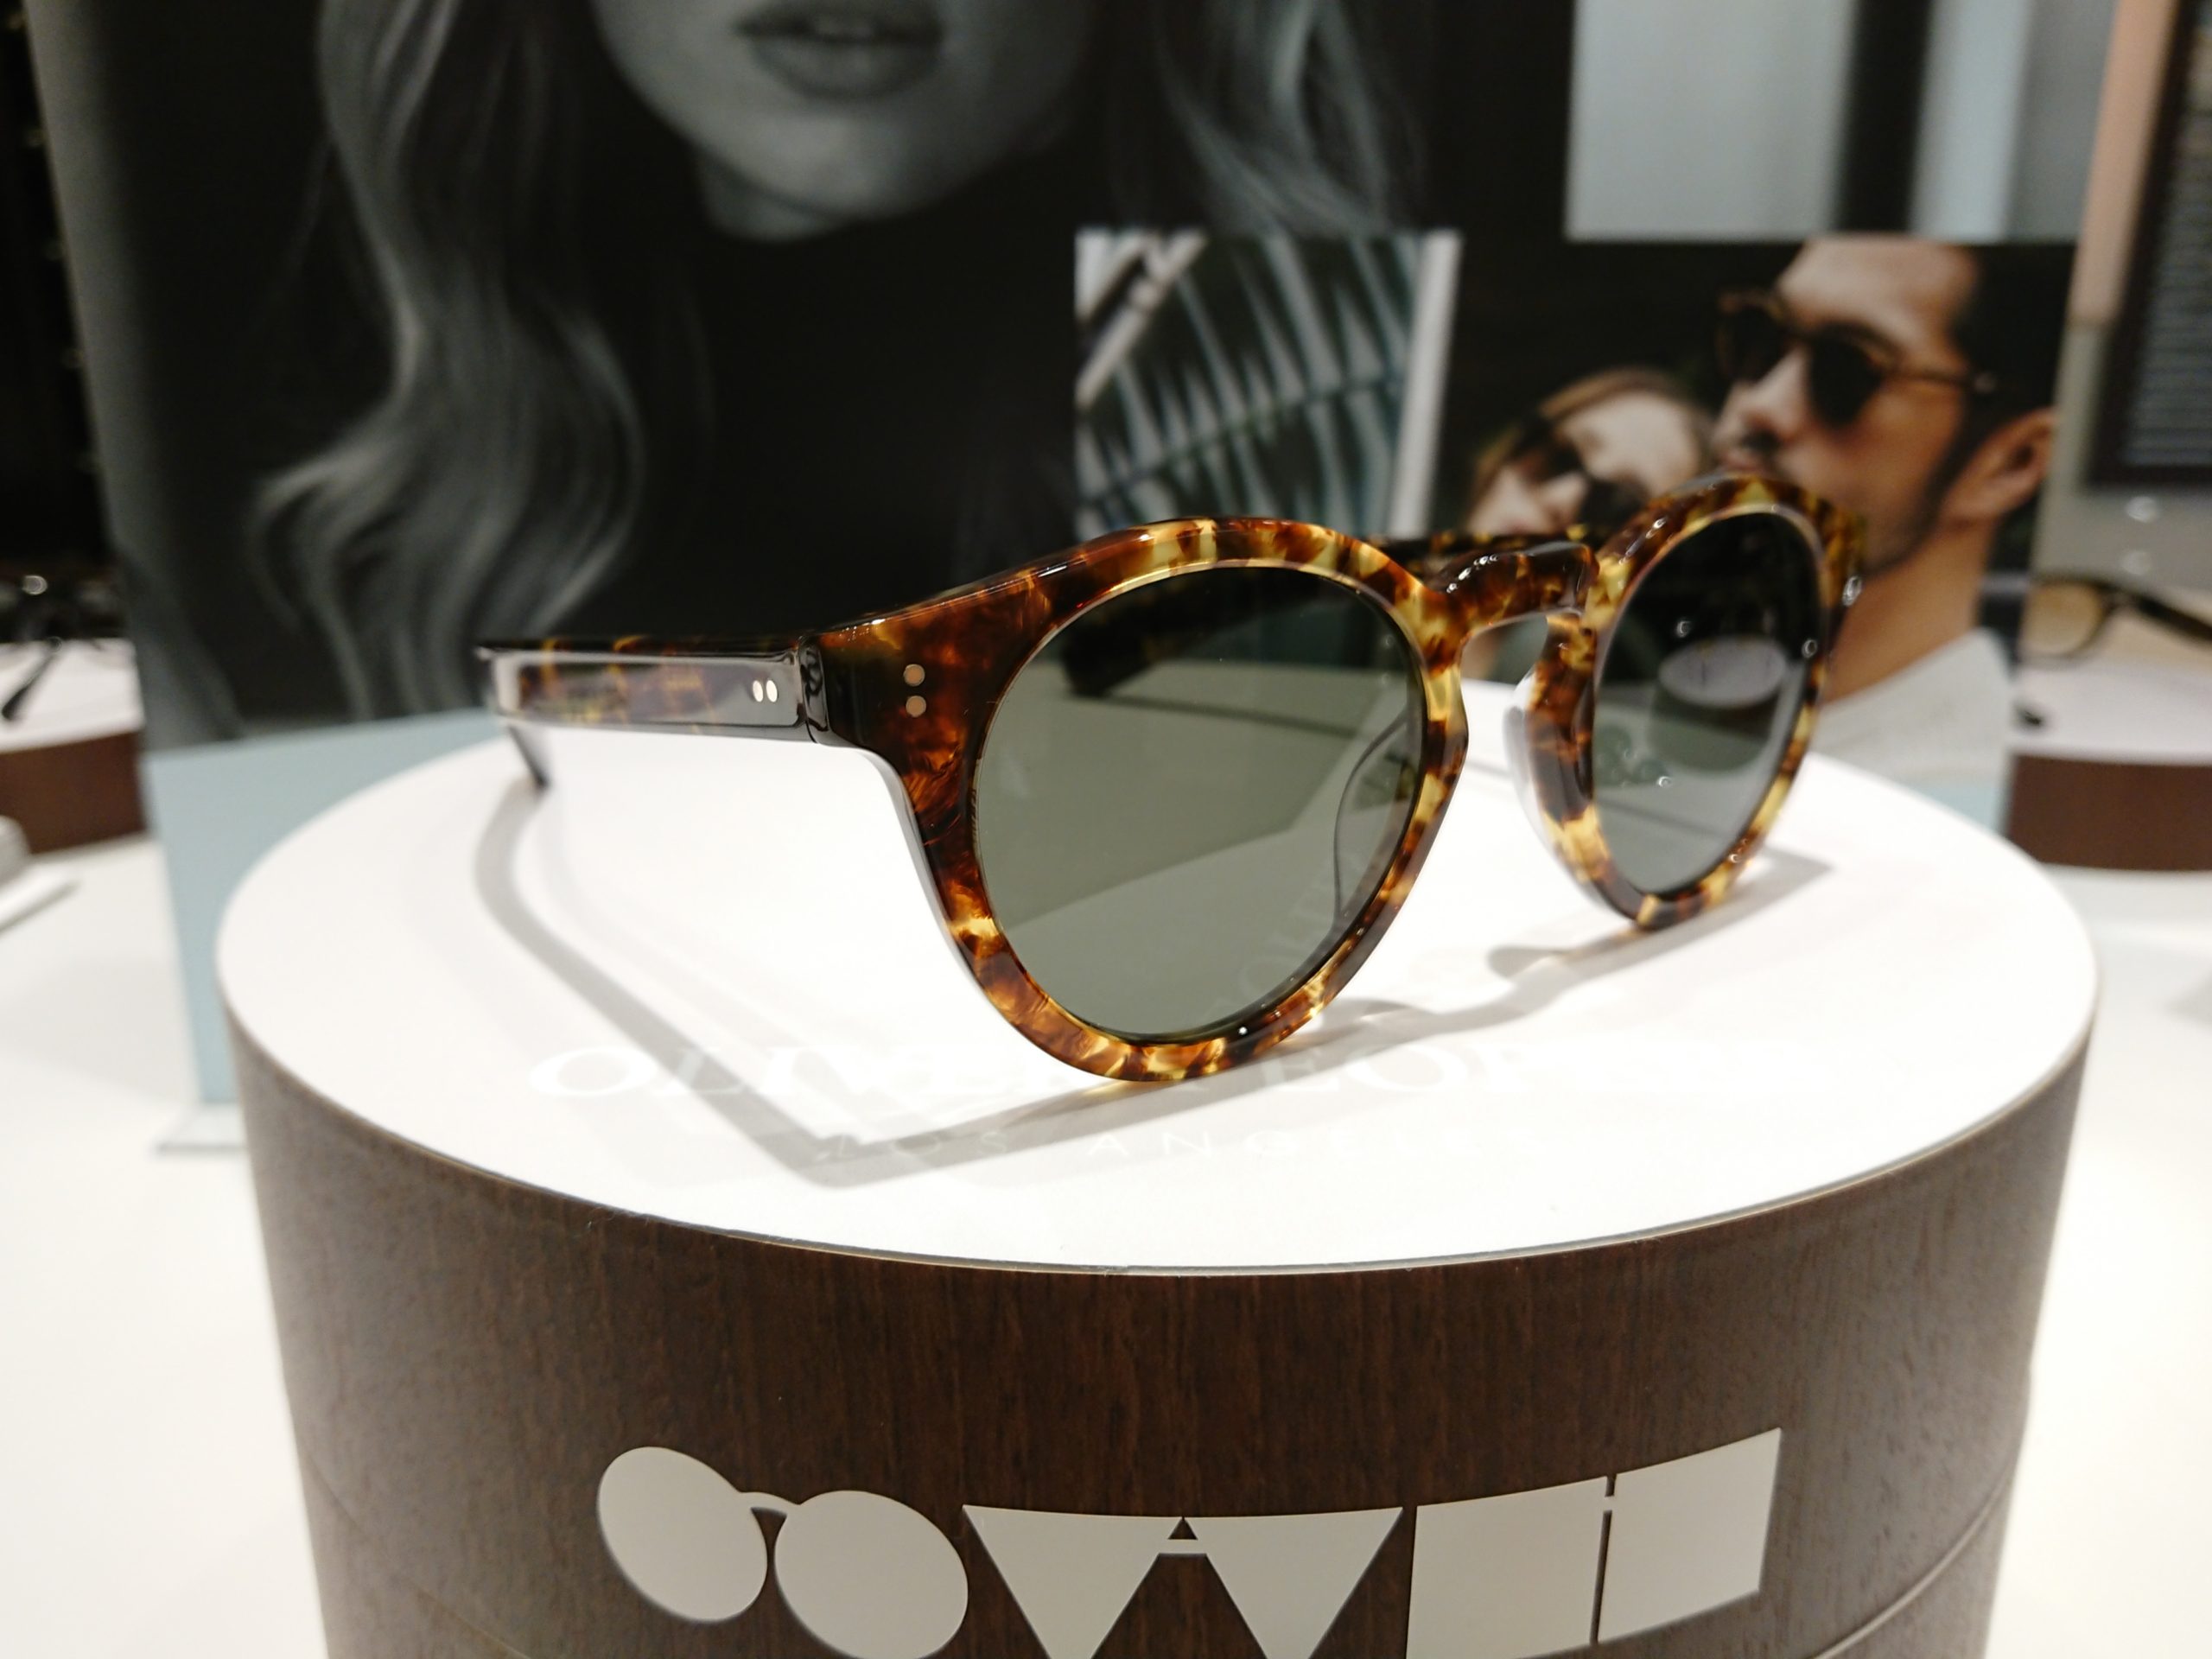 ✰New Stock✰ 【OLIVER PEOPLES Martineaux】オリバーピープルズ 